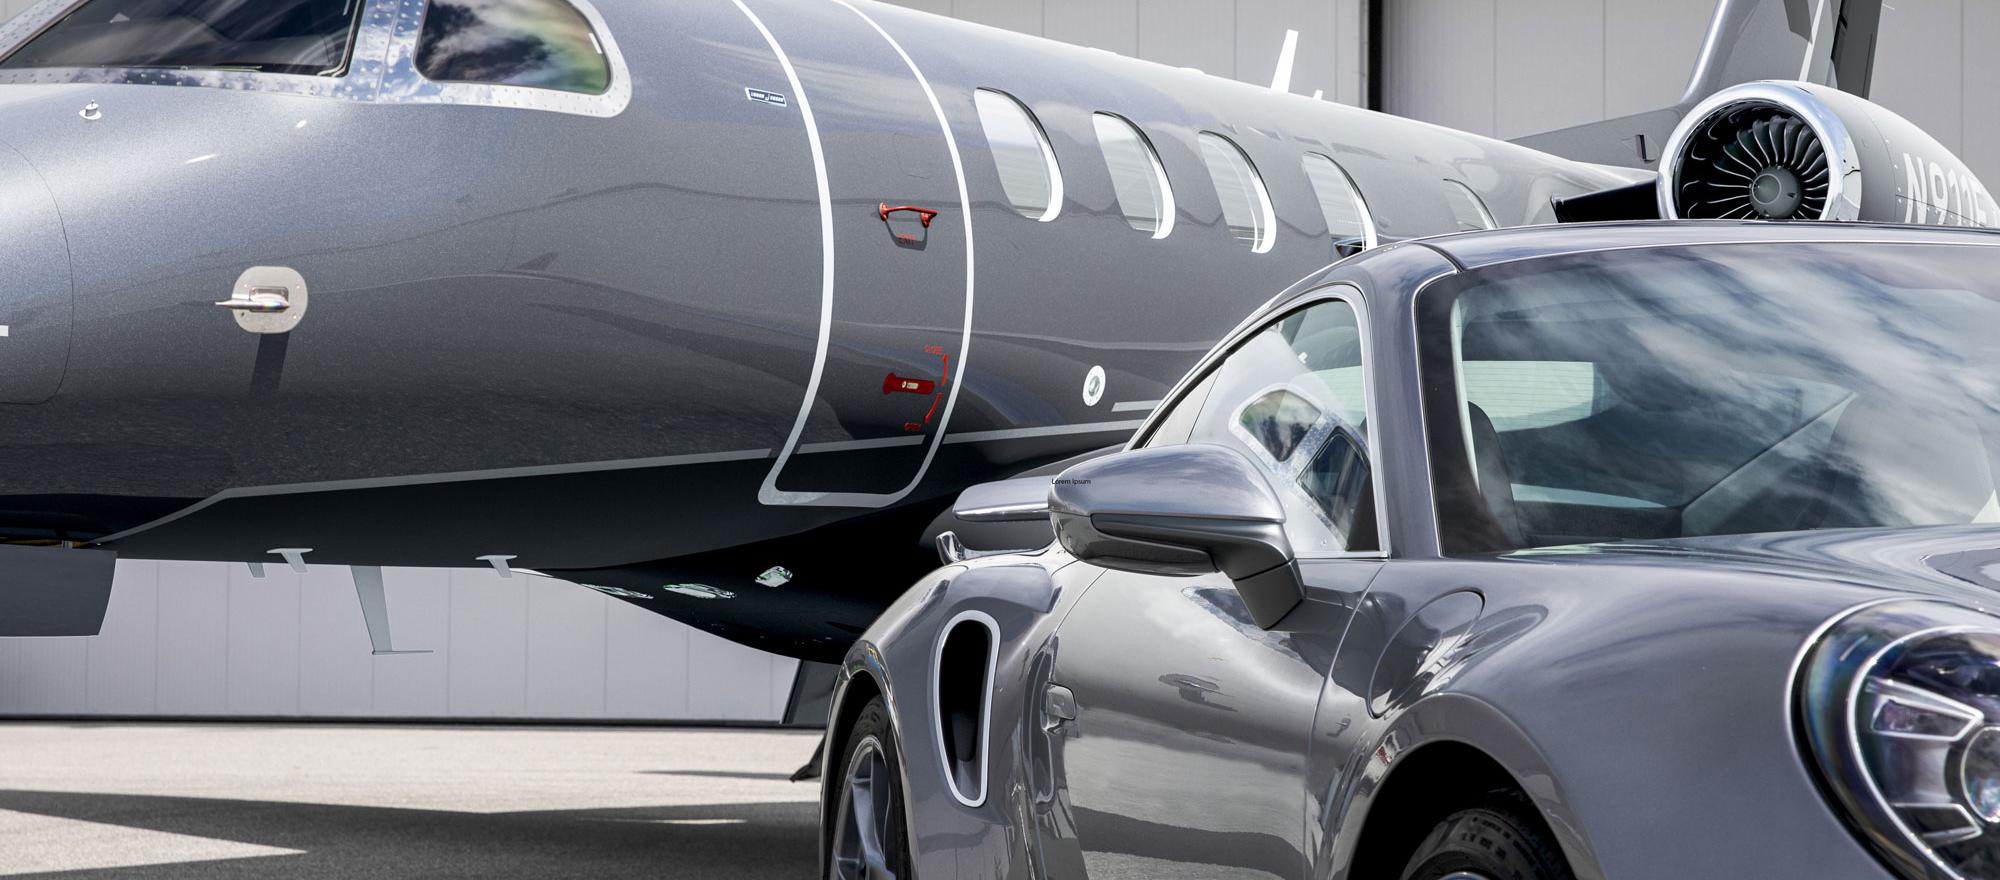 Limited-edition Embraer Phenom 300E and Porsche 911 Turbo S "Duet" pairing